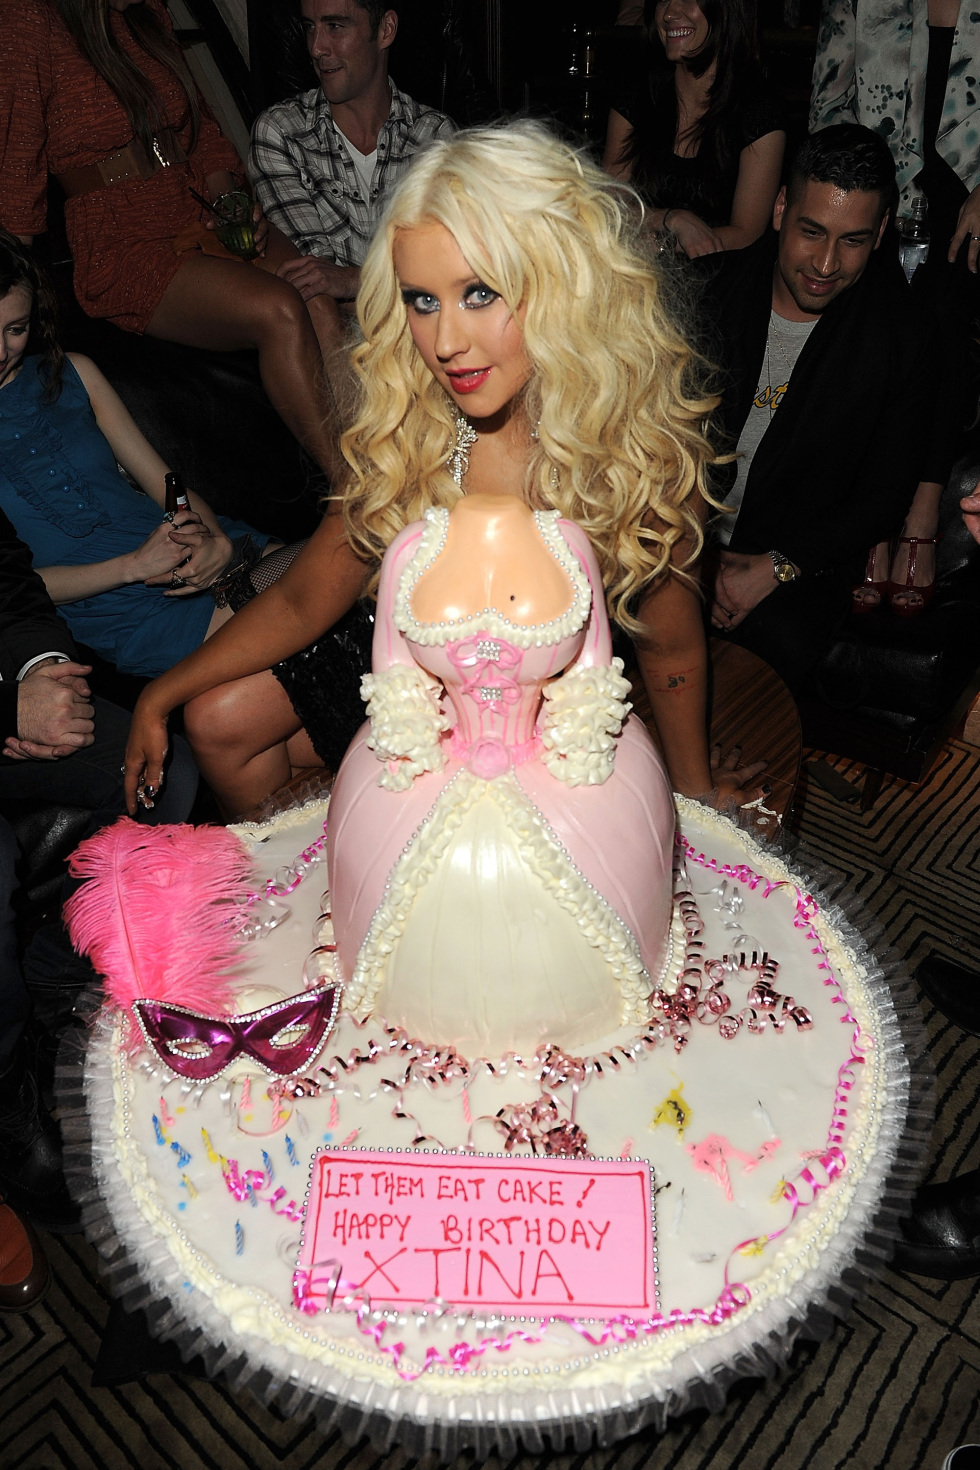 Christina Aguilera celebrates her birthday with a cake by Hansens Cakes